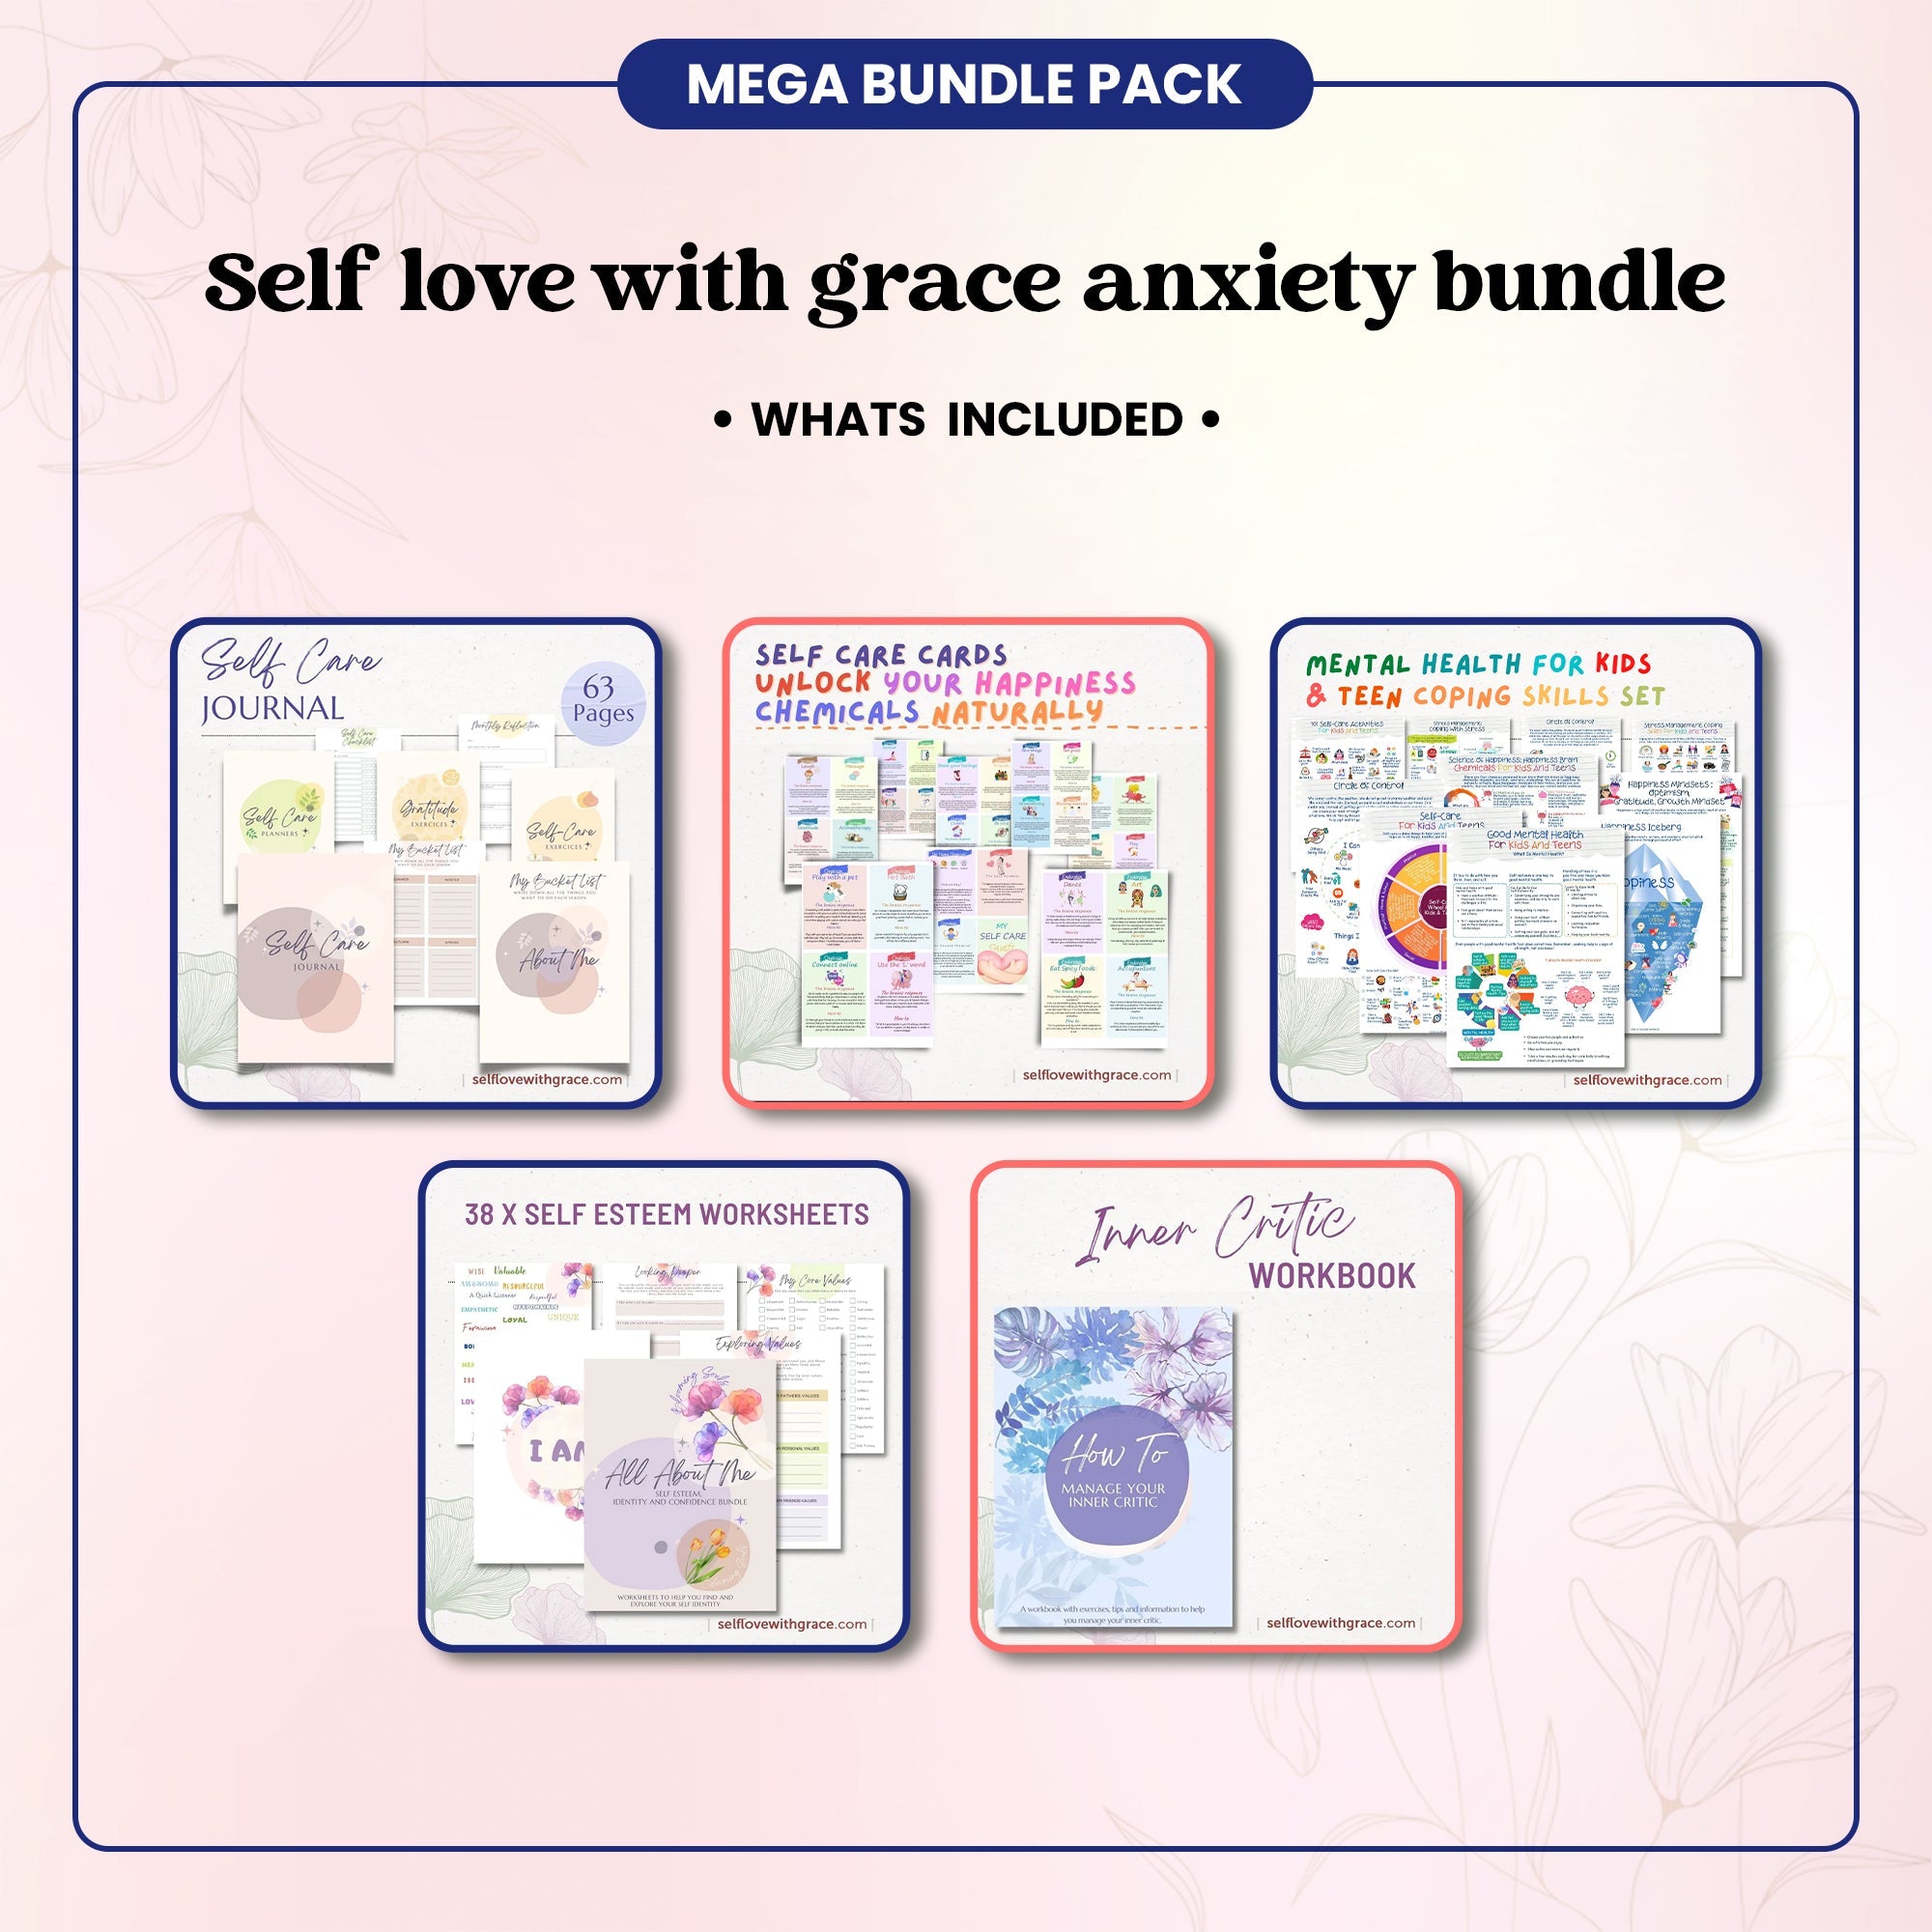 SELFLOVEWITHGRACE Anxiety Bundle - Anxiety Coping Emotional Support Therapy Tools